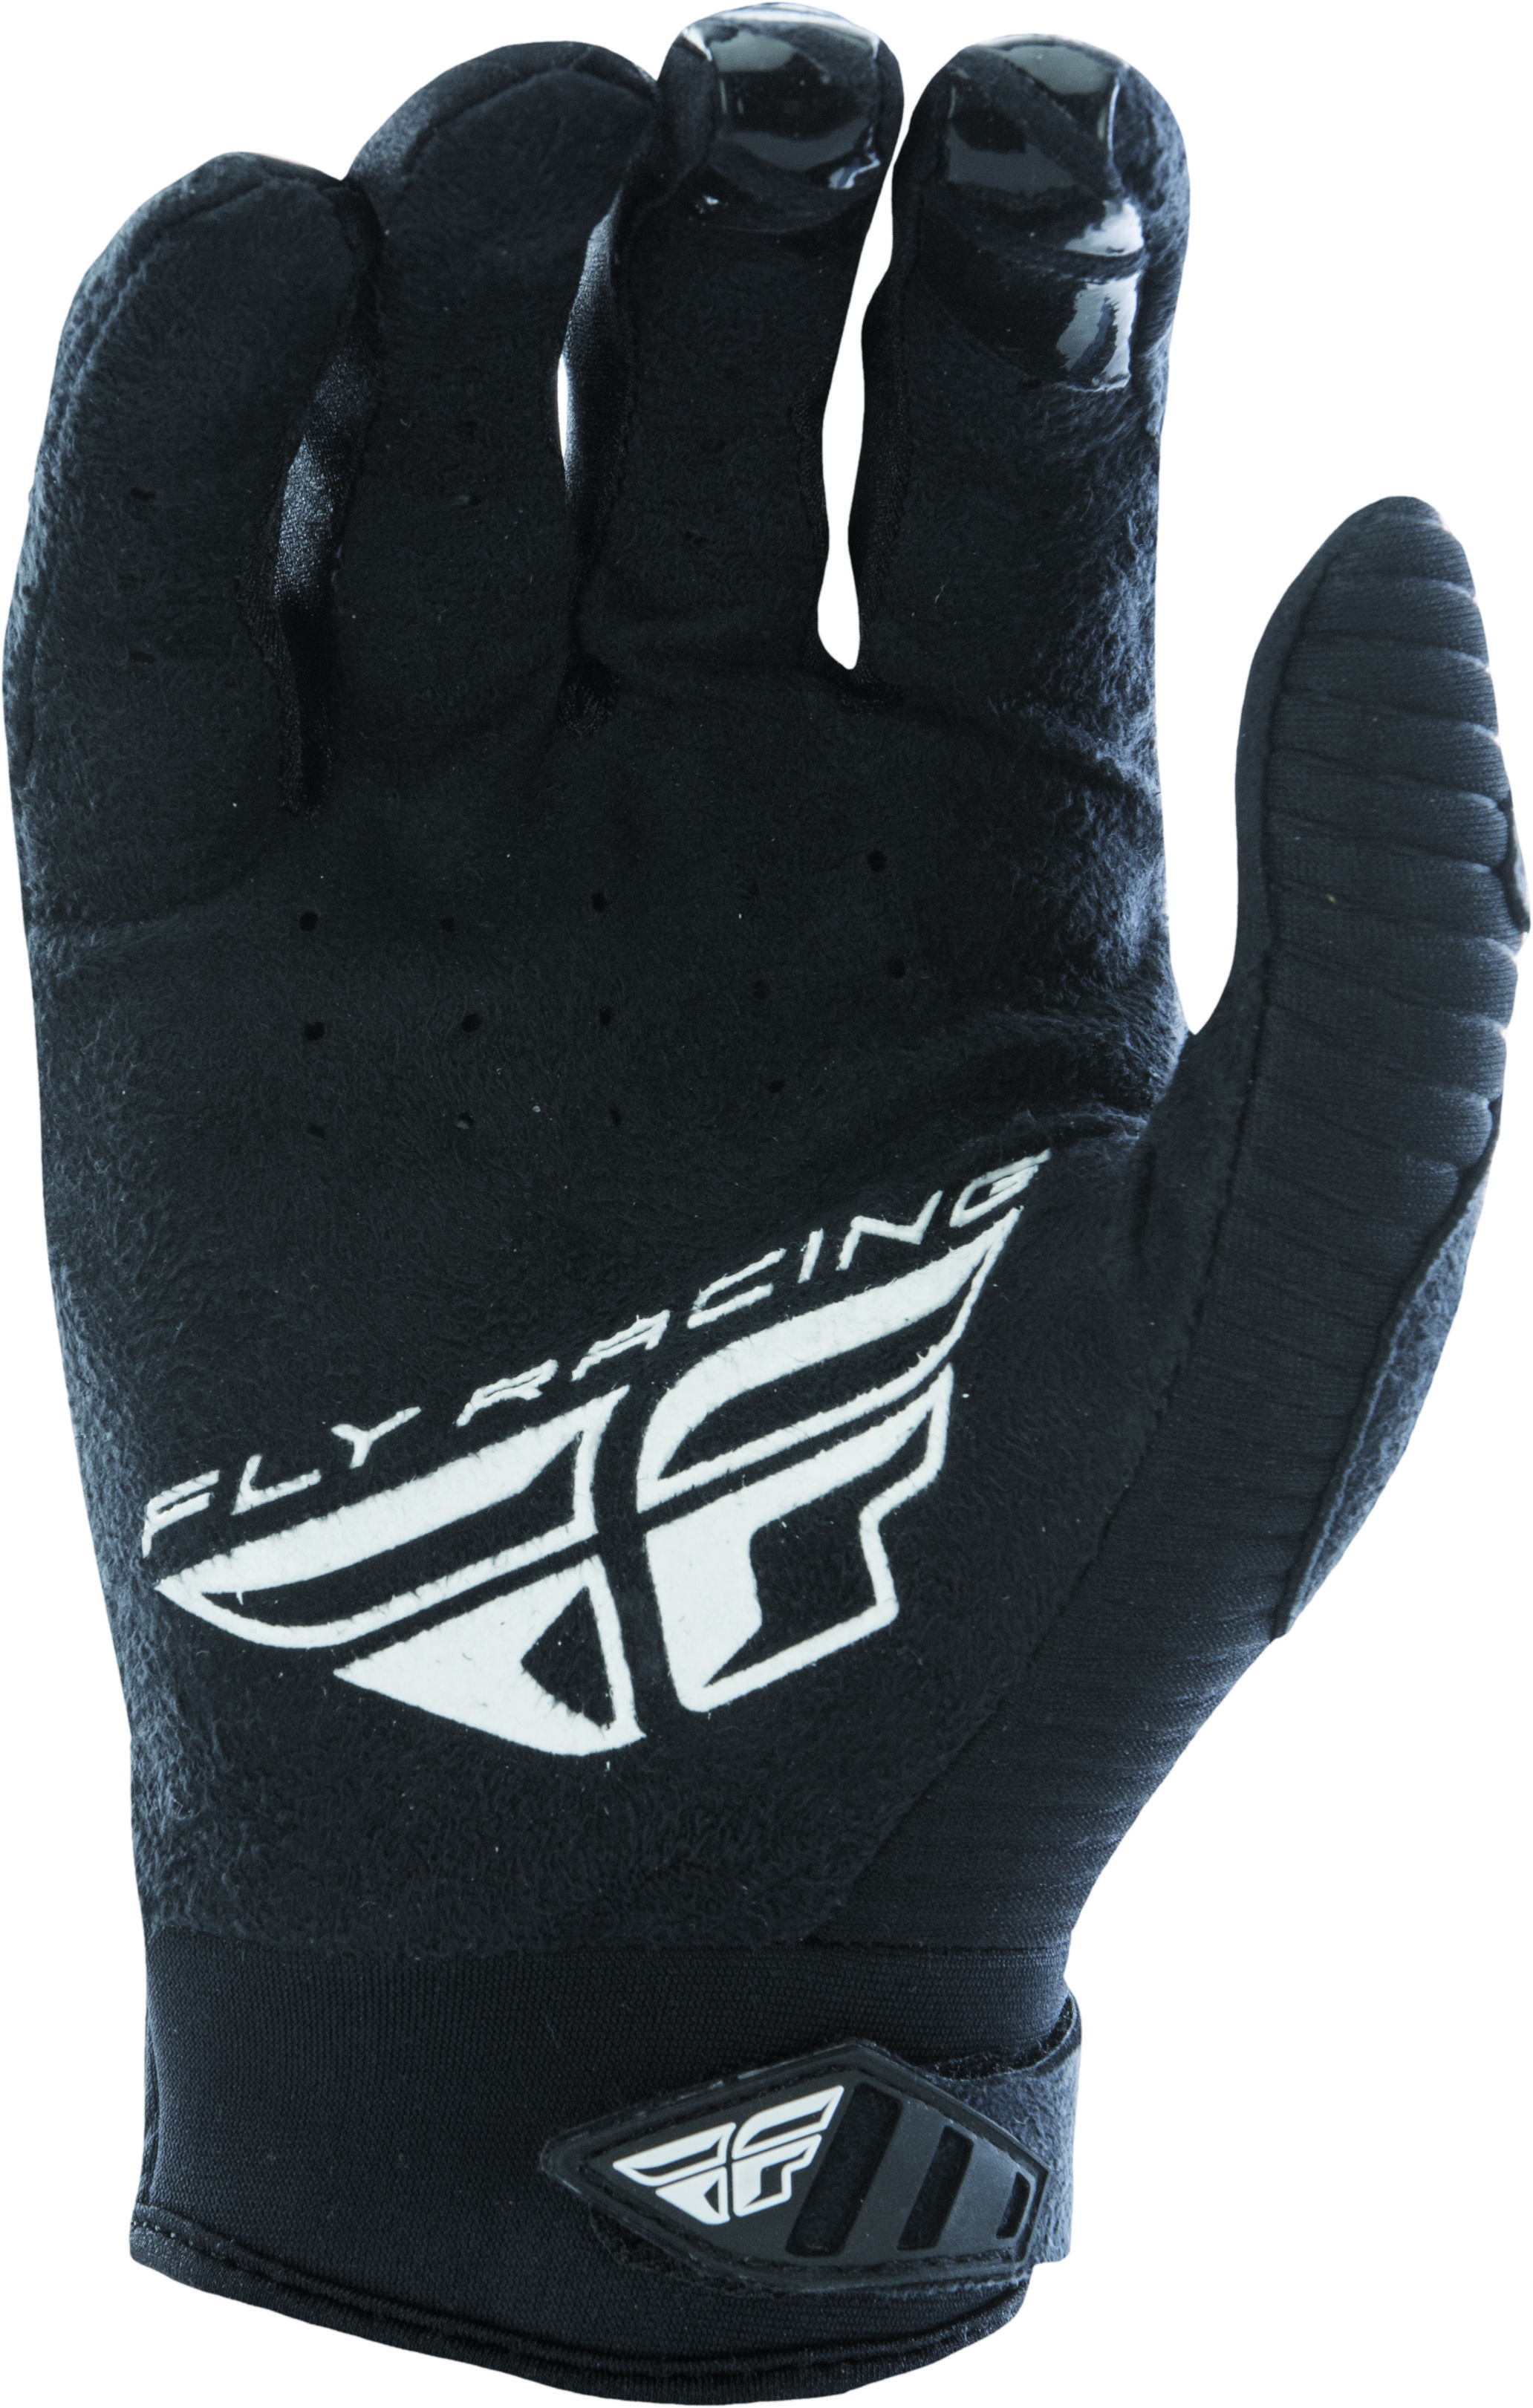 Patrol Xc Lite Riding Gloves For MX & Off-Road Black Size 10 - Click Image to Close